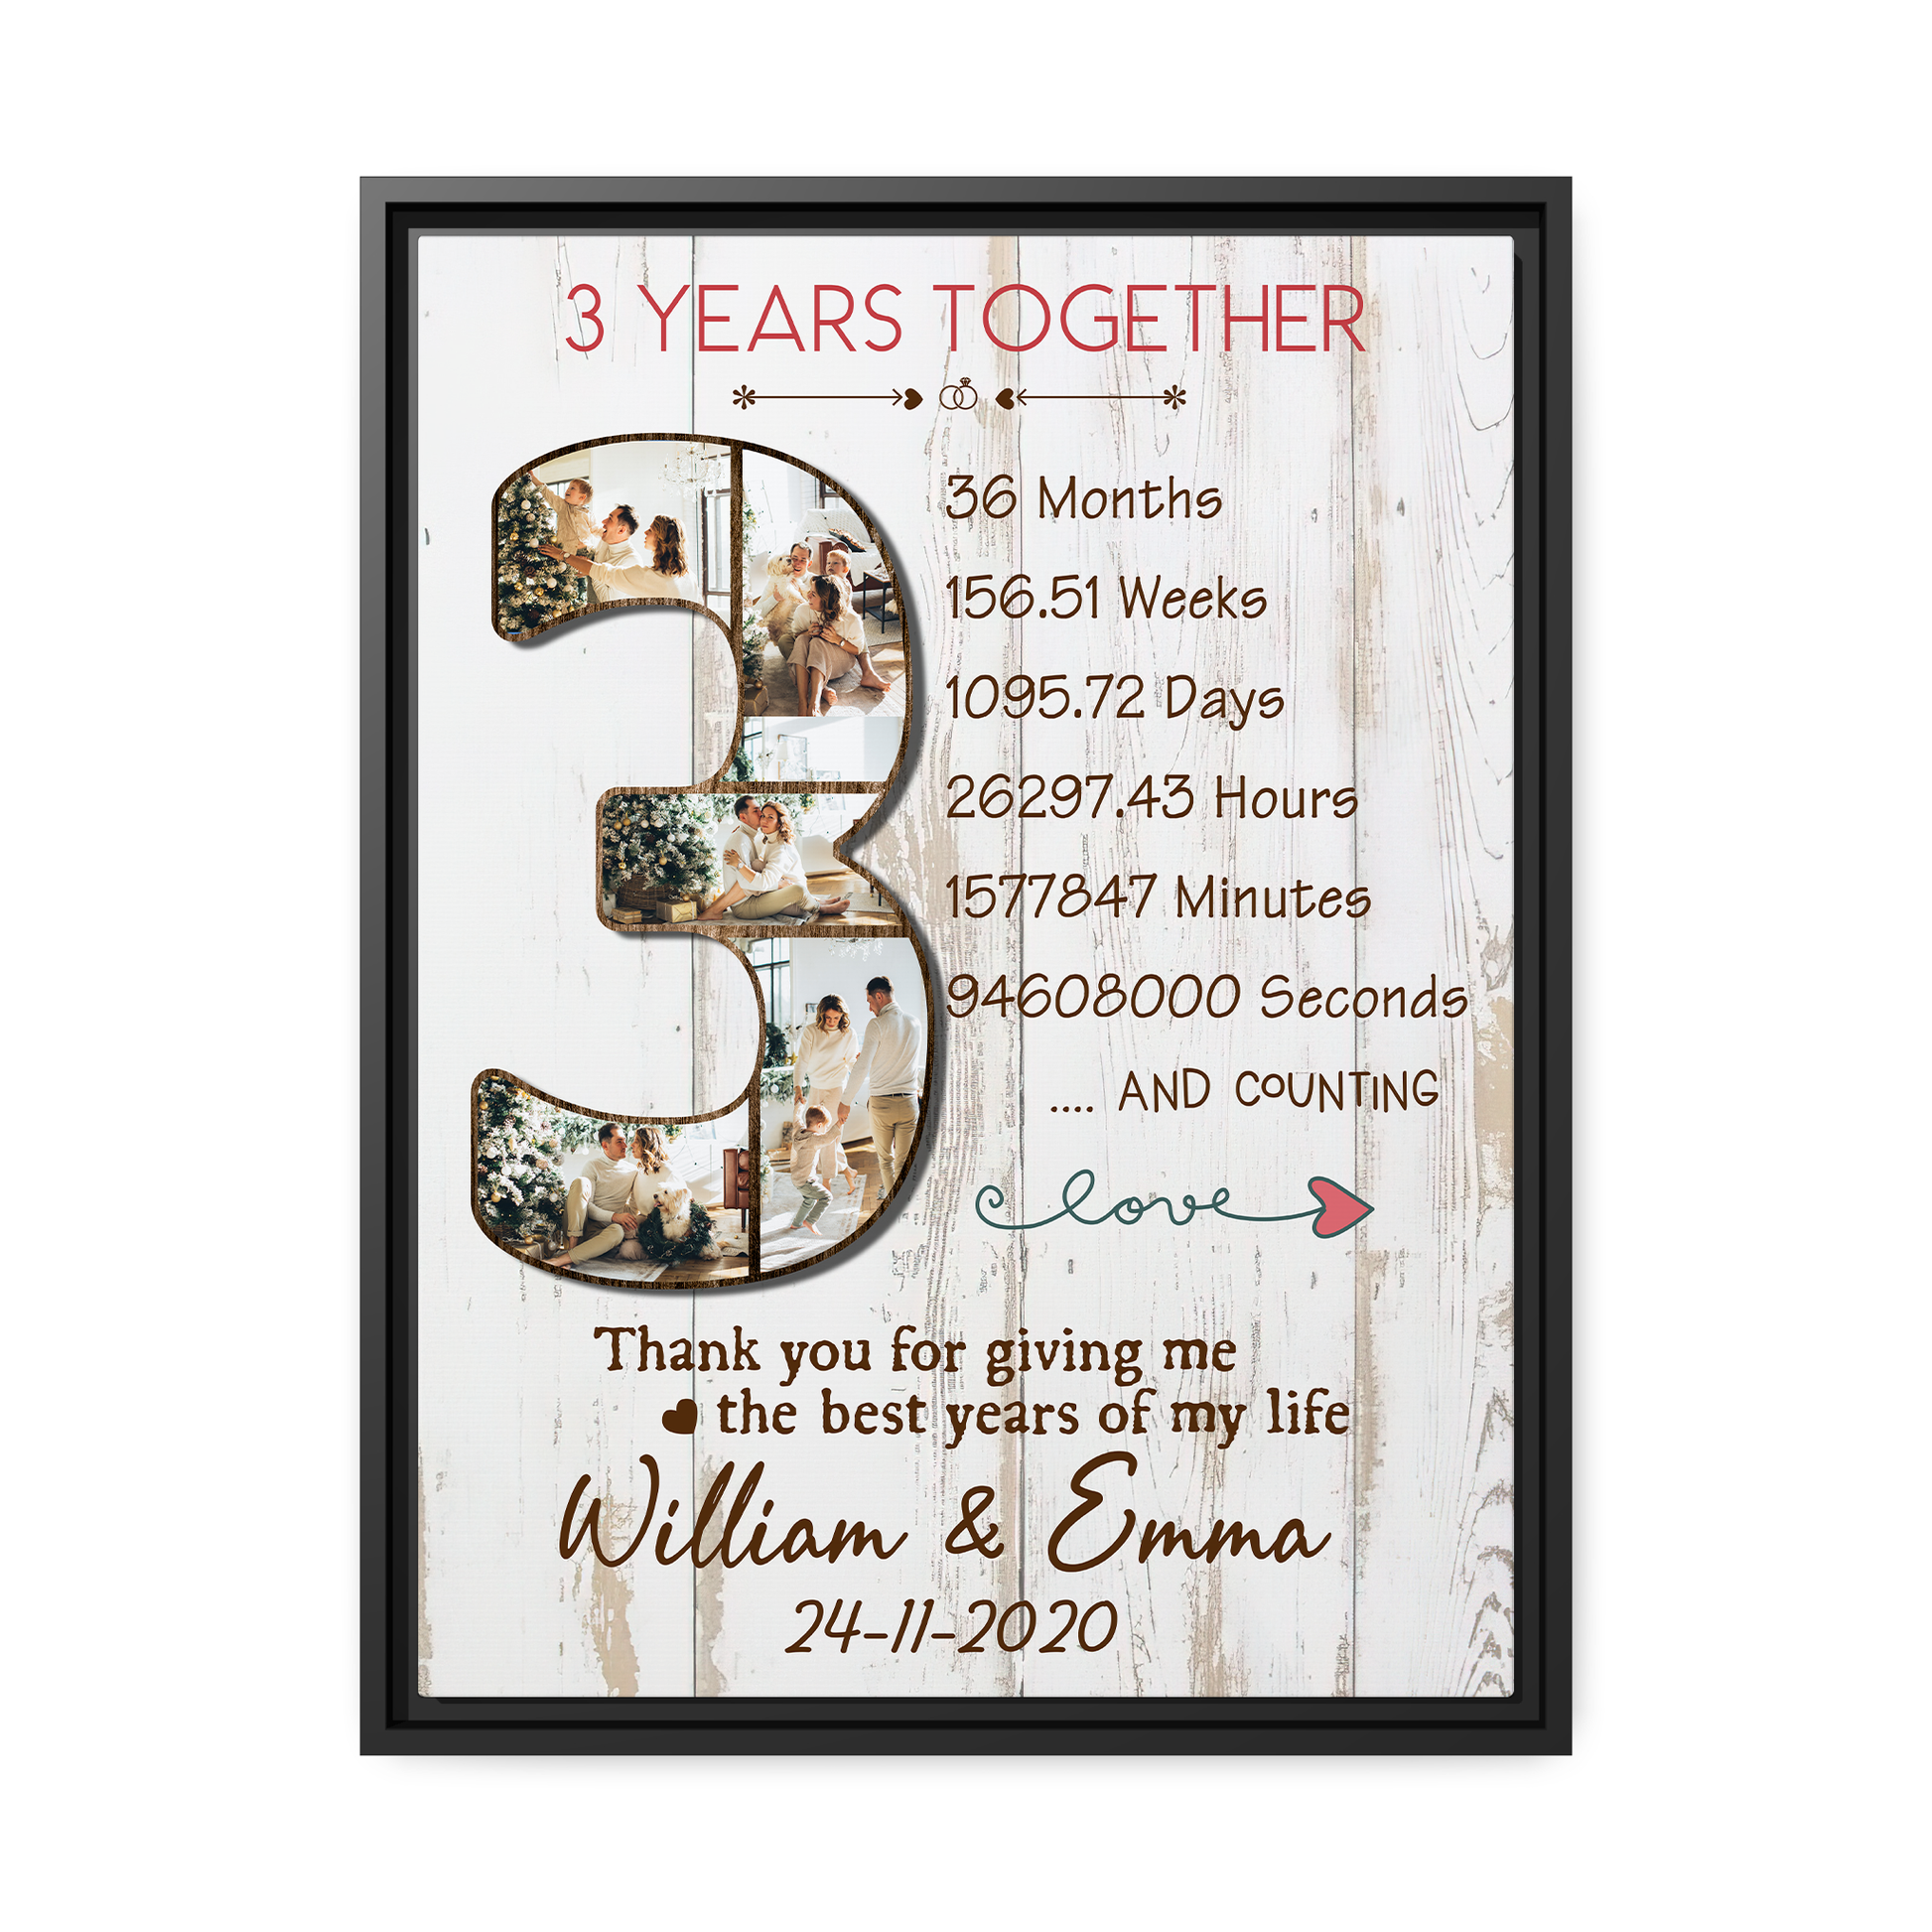 Personalized wedding anniversary gift for him for her - 3 years together - custom Couple photo canvas print - MyMindfulGifts